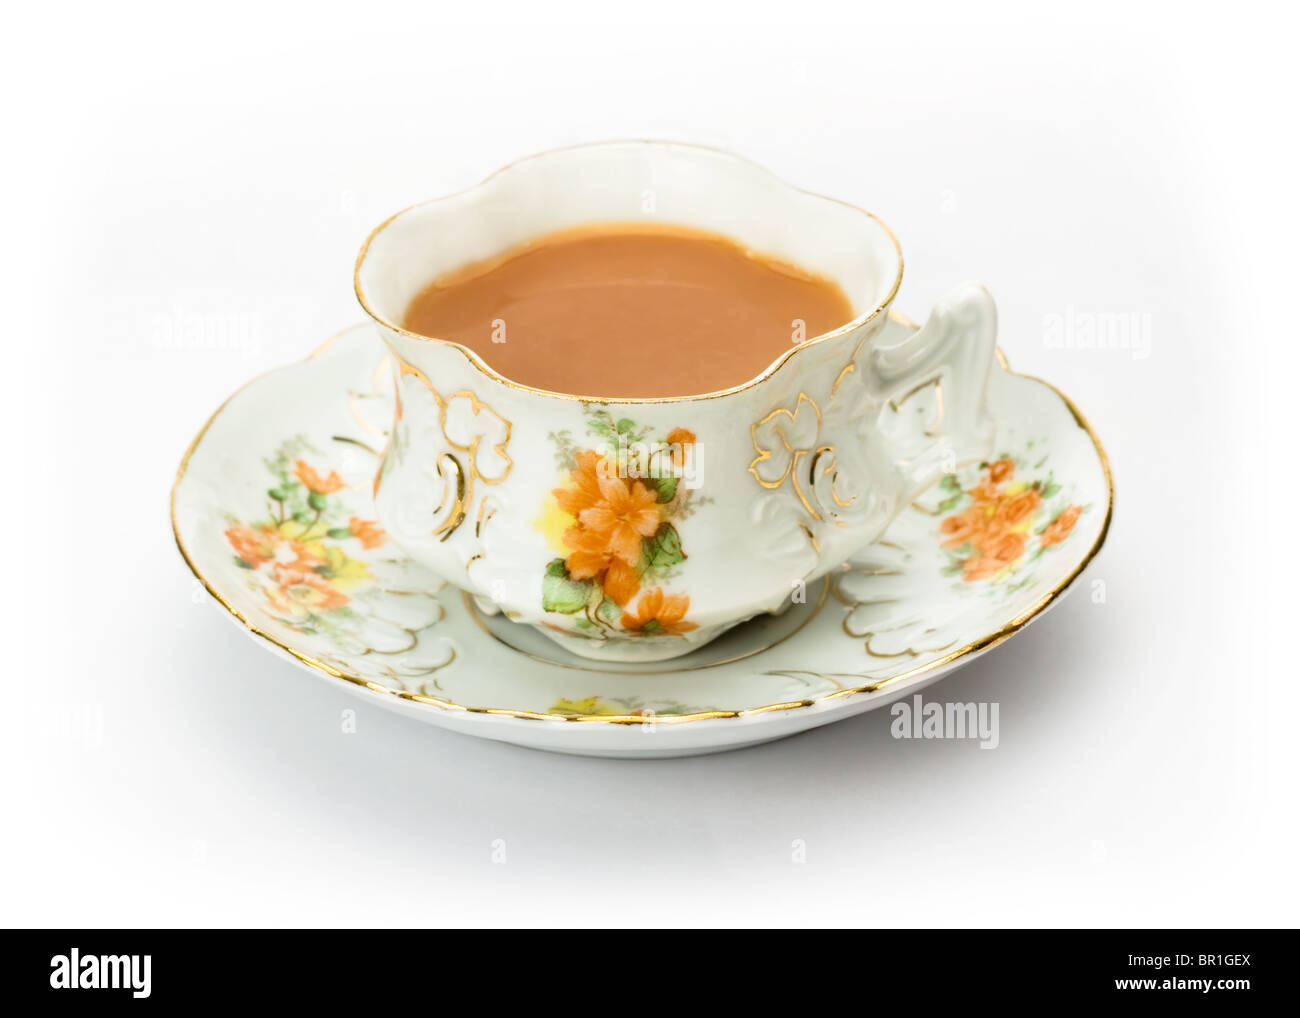 Old fashioned teacup Stock Photo